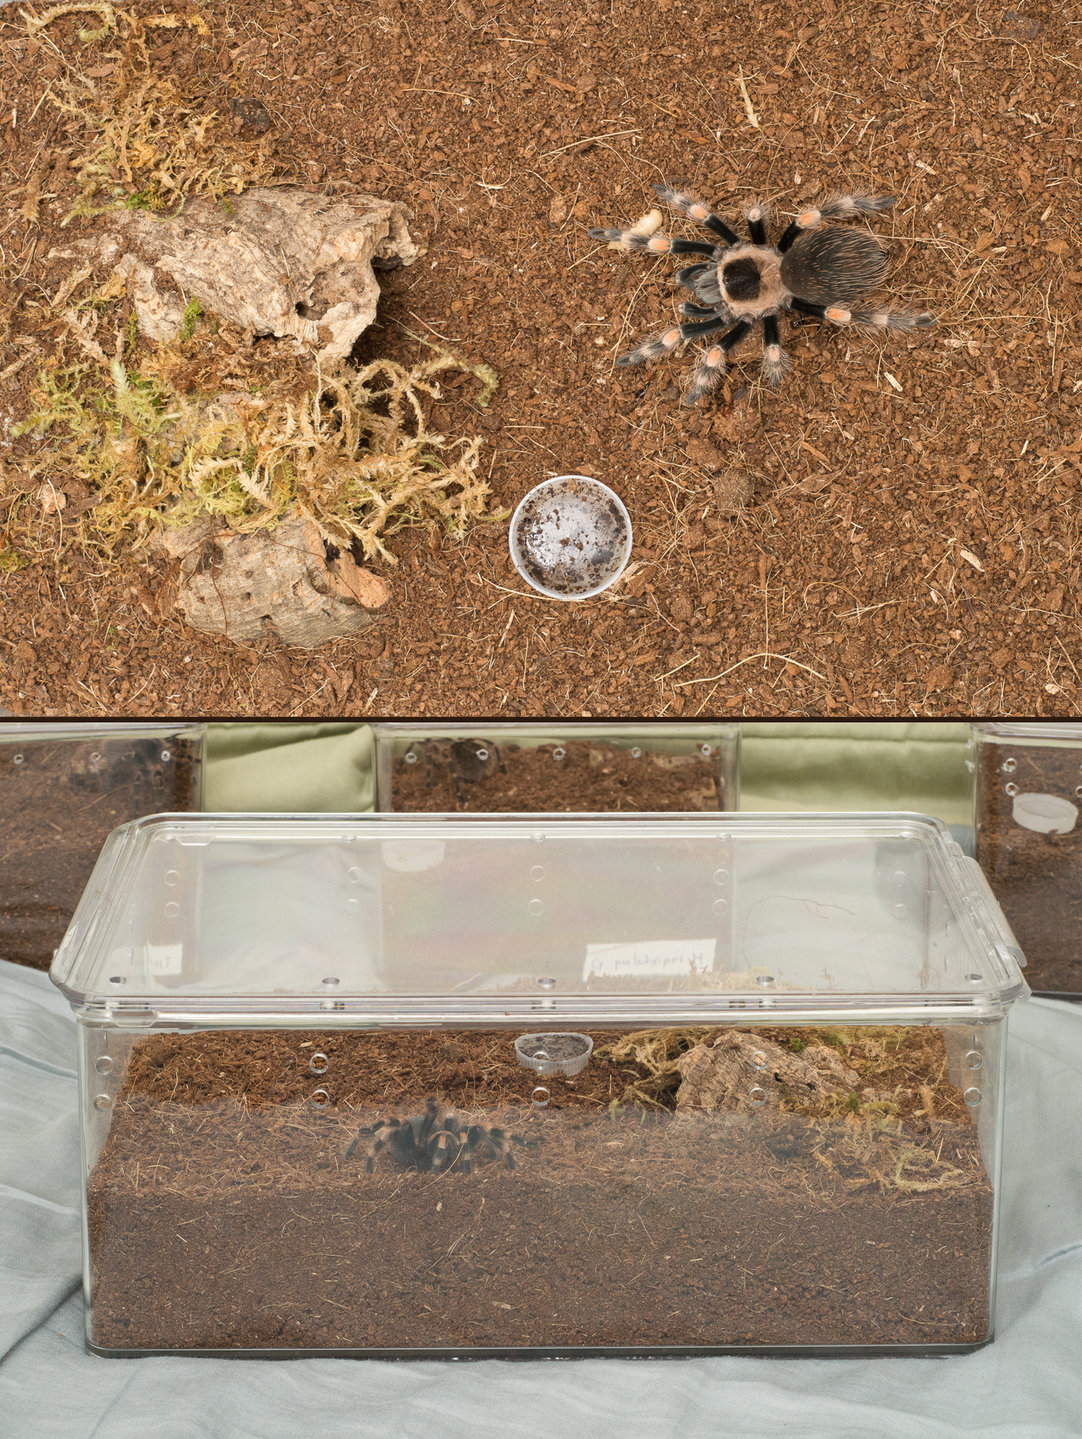 new enclosure for growing B. smithi